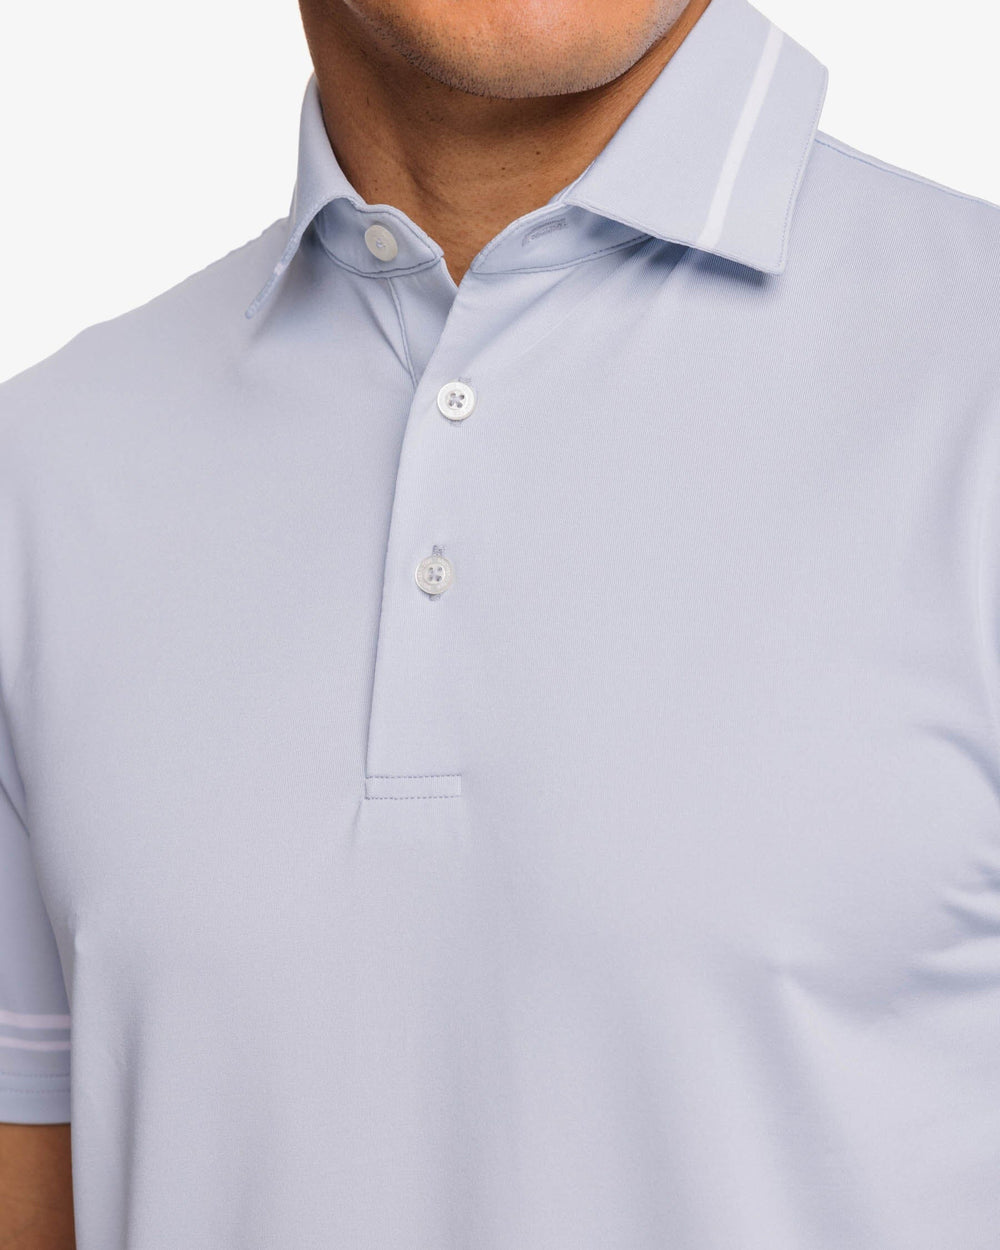 The detail view of the Southern Tide Driver Brantley Stripe Performance Polo Shirt by Southern Tide - Slate Grey